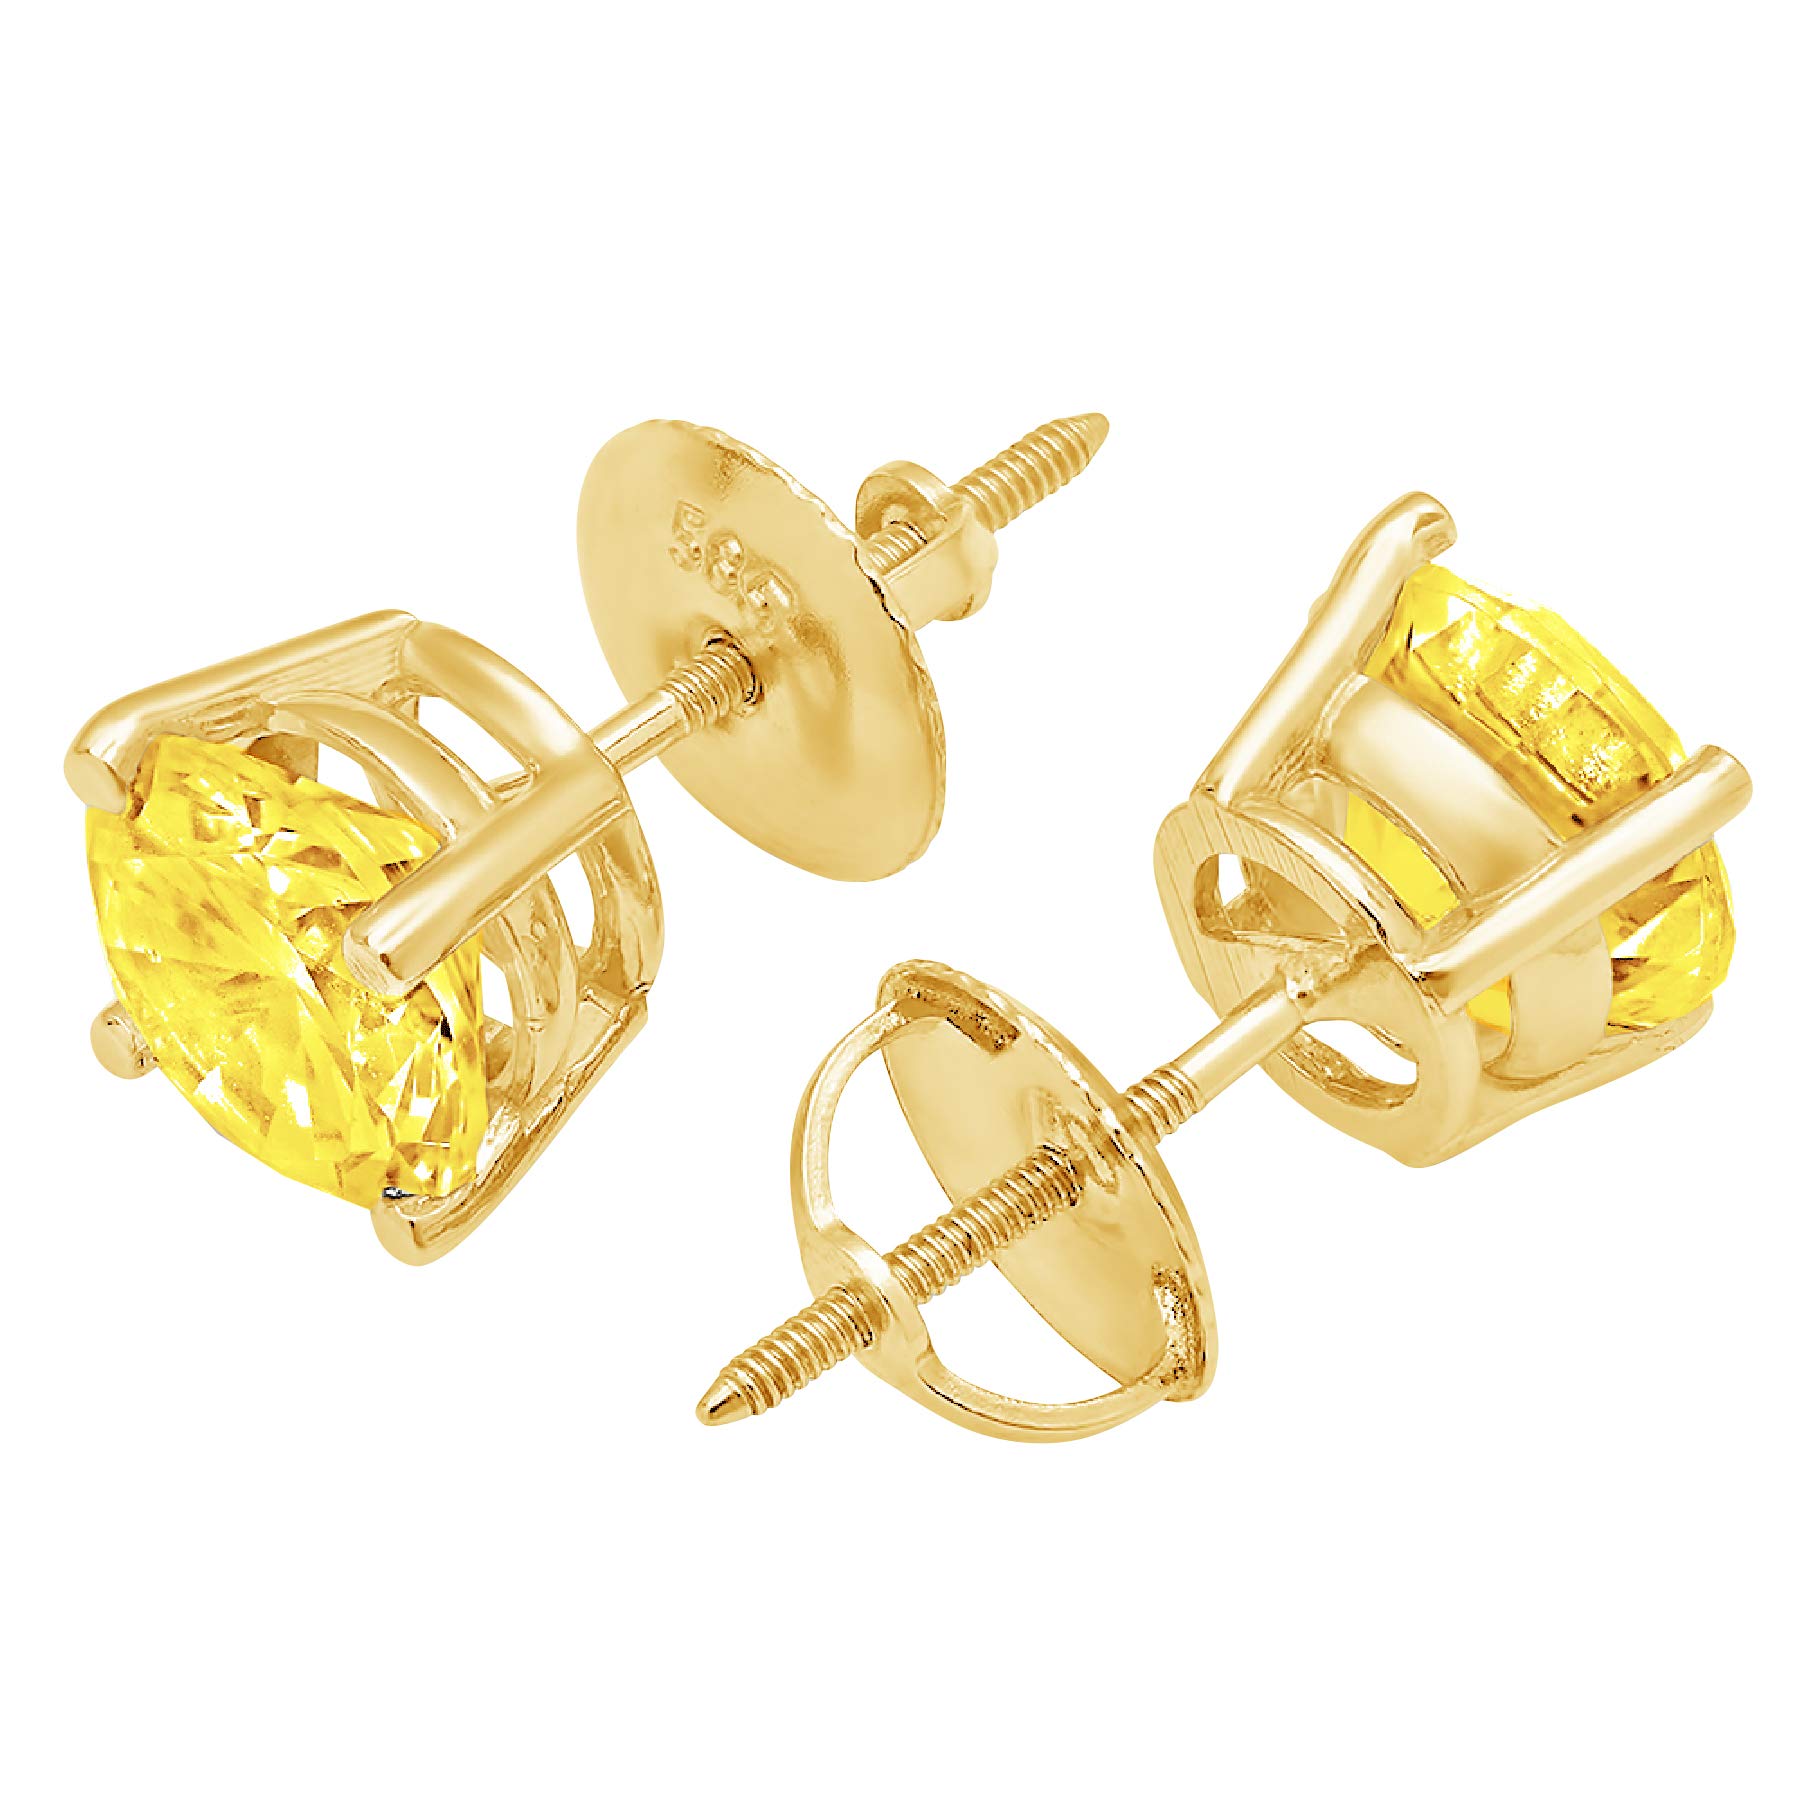 4.0 ct Round Cut ideal VVS1 Conflict Free Gemstone Solitaire Canary Yellow CZ Classic Designer Stud Earrings Solid 14k Yellow Gold Screw Back